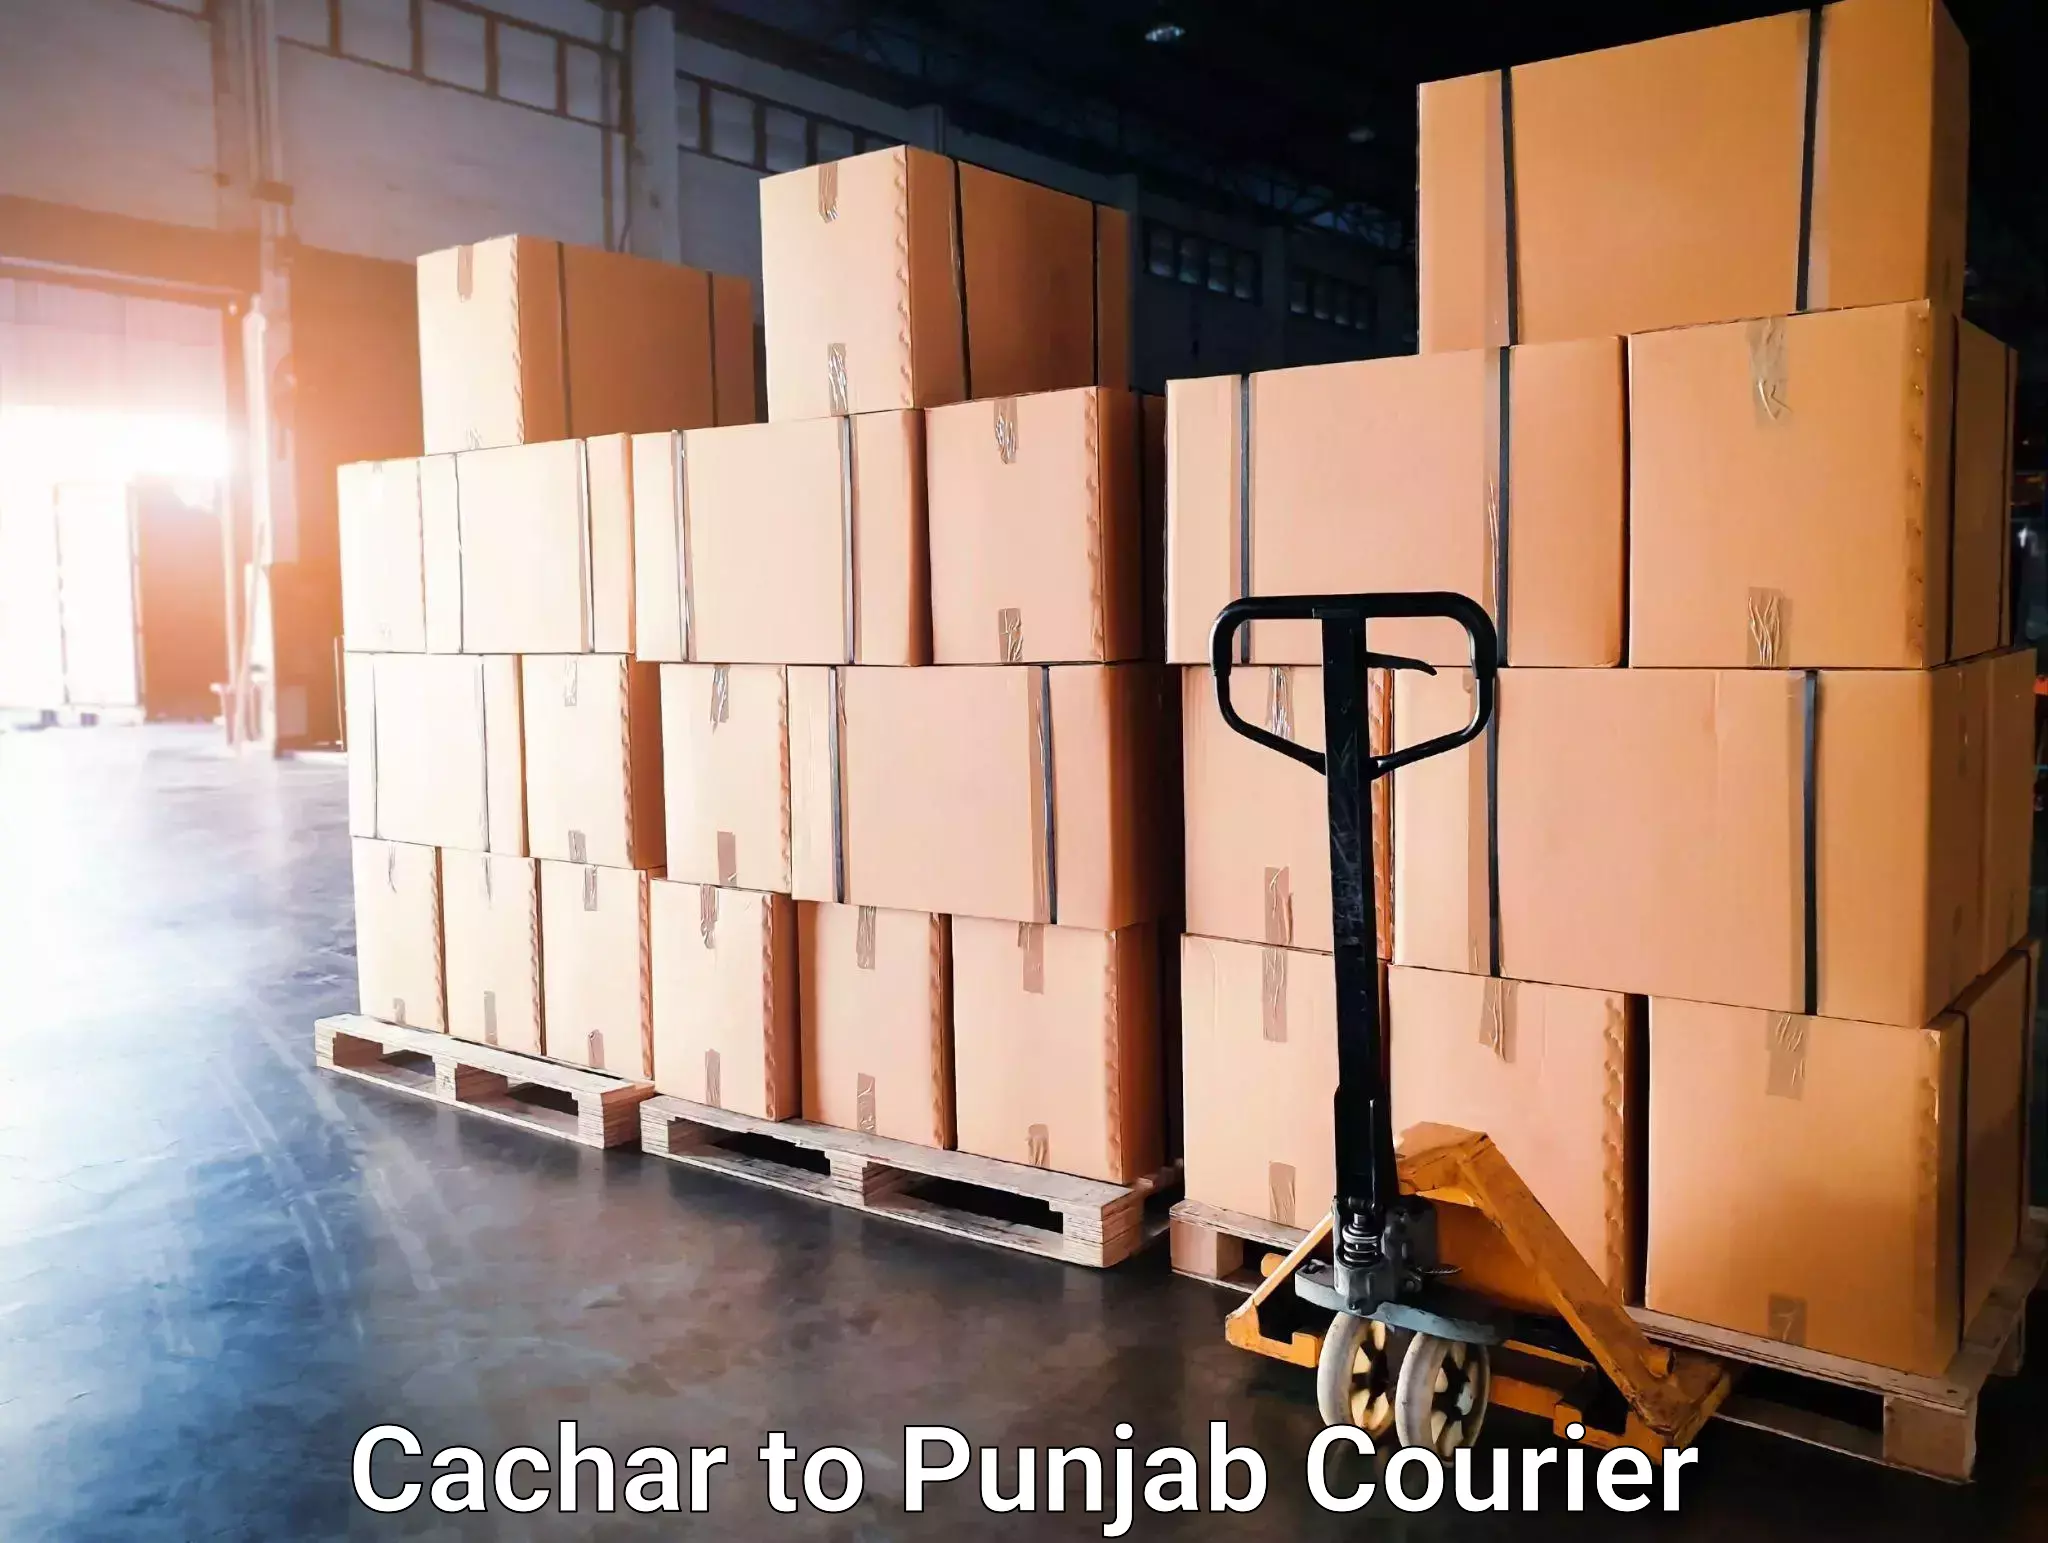 Subscription-based courier Cachar to Mukerian